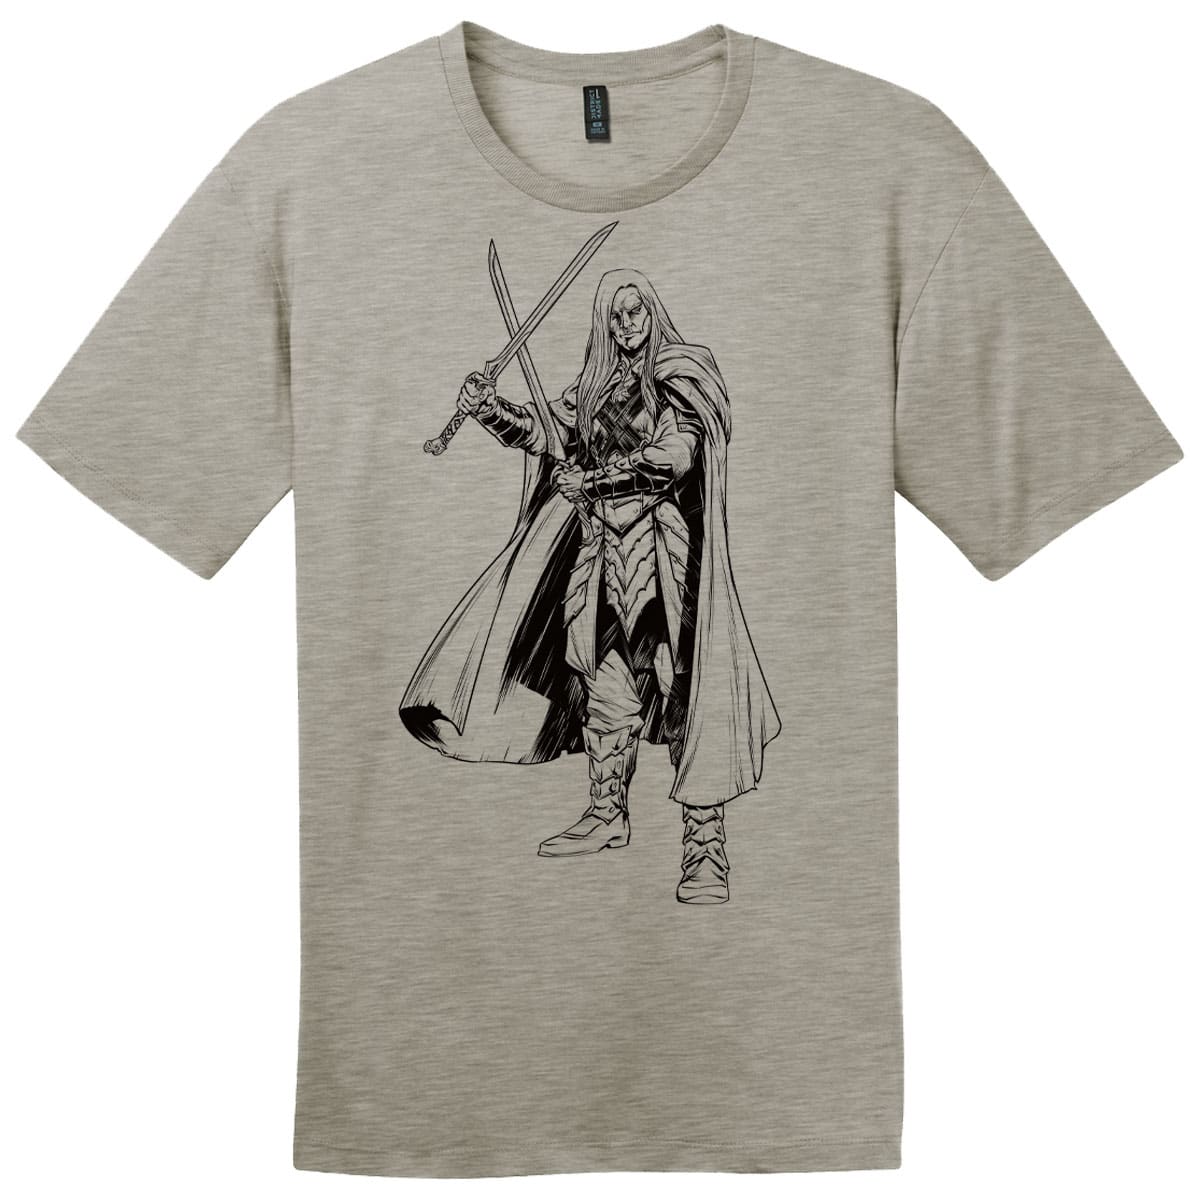 Adventures in the Forgotten Realms Drizzt Do'Urden T-shirt for Dungeons & Dragons - MTG Pro Shop